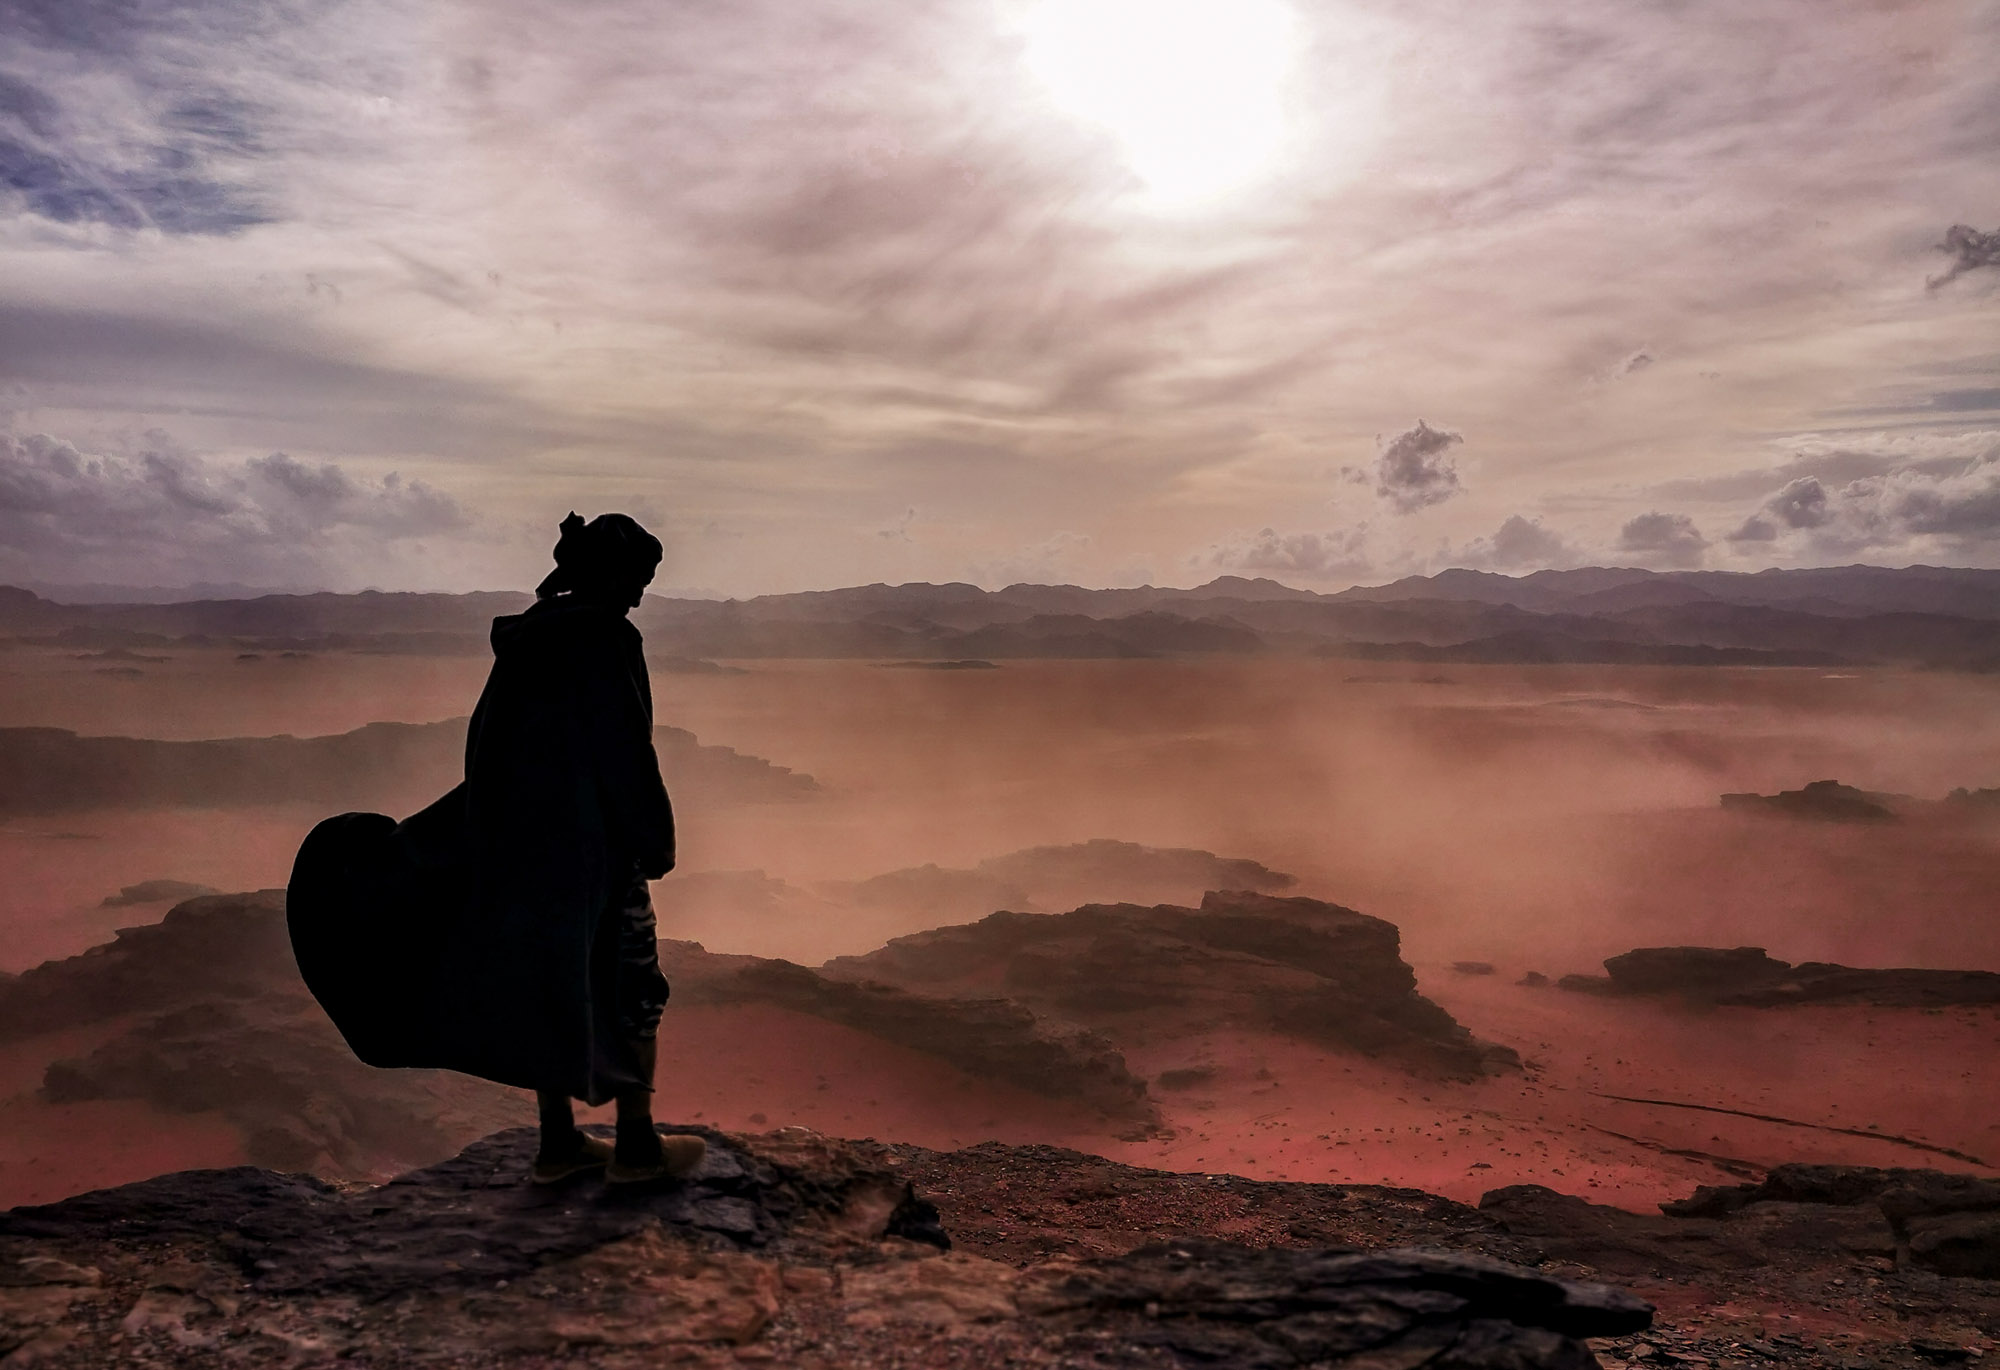 A person stands on top of a rock in a vast red sand desert